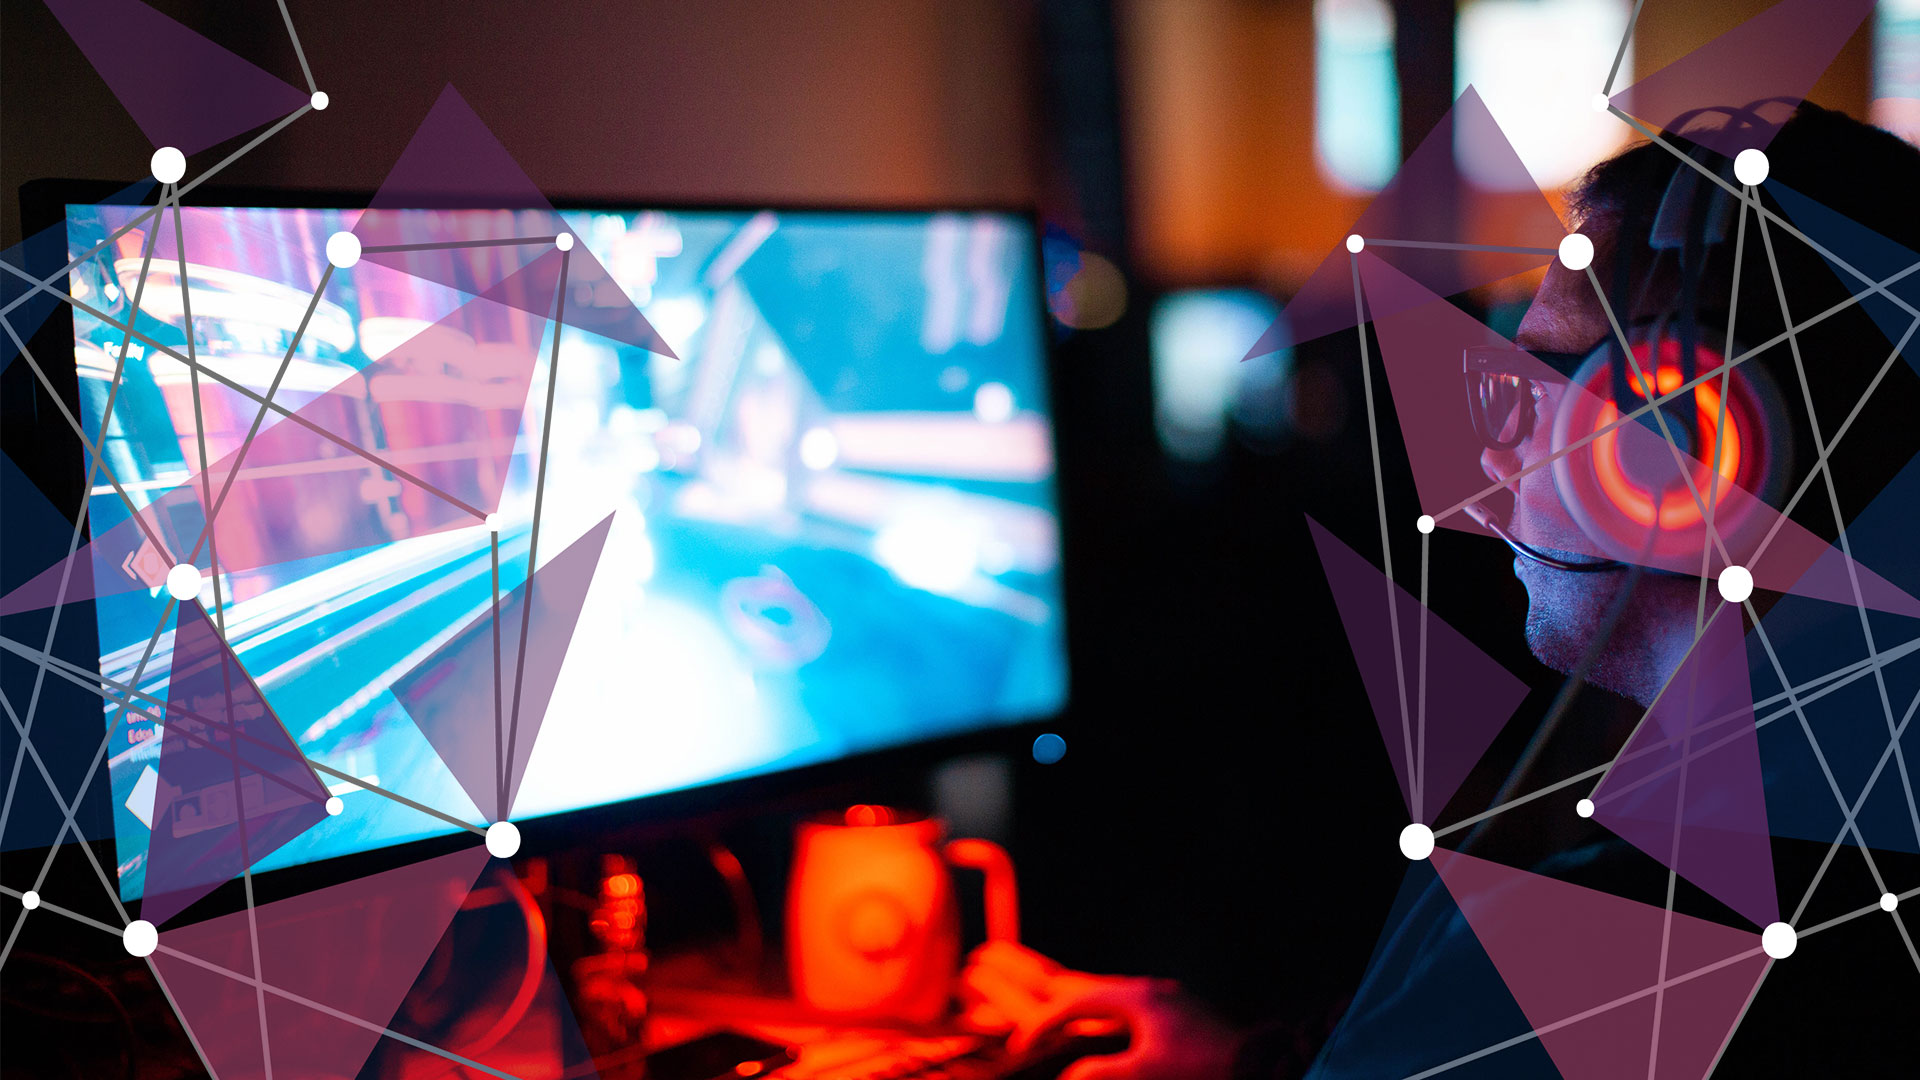 How important are upload speeds for gaming? - Ghost Gaming Broadband